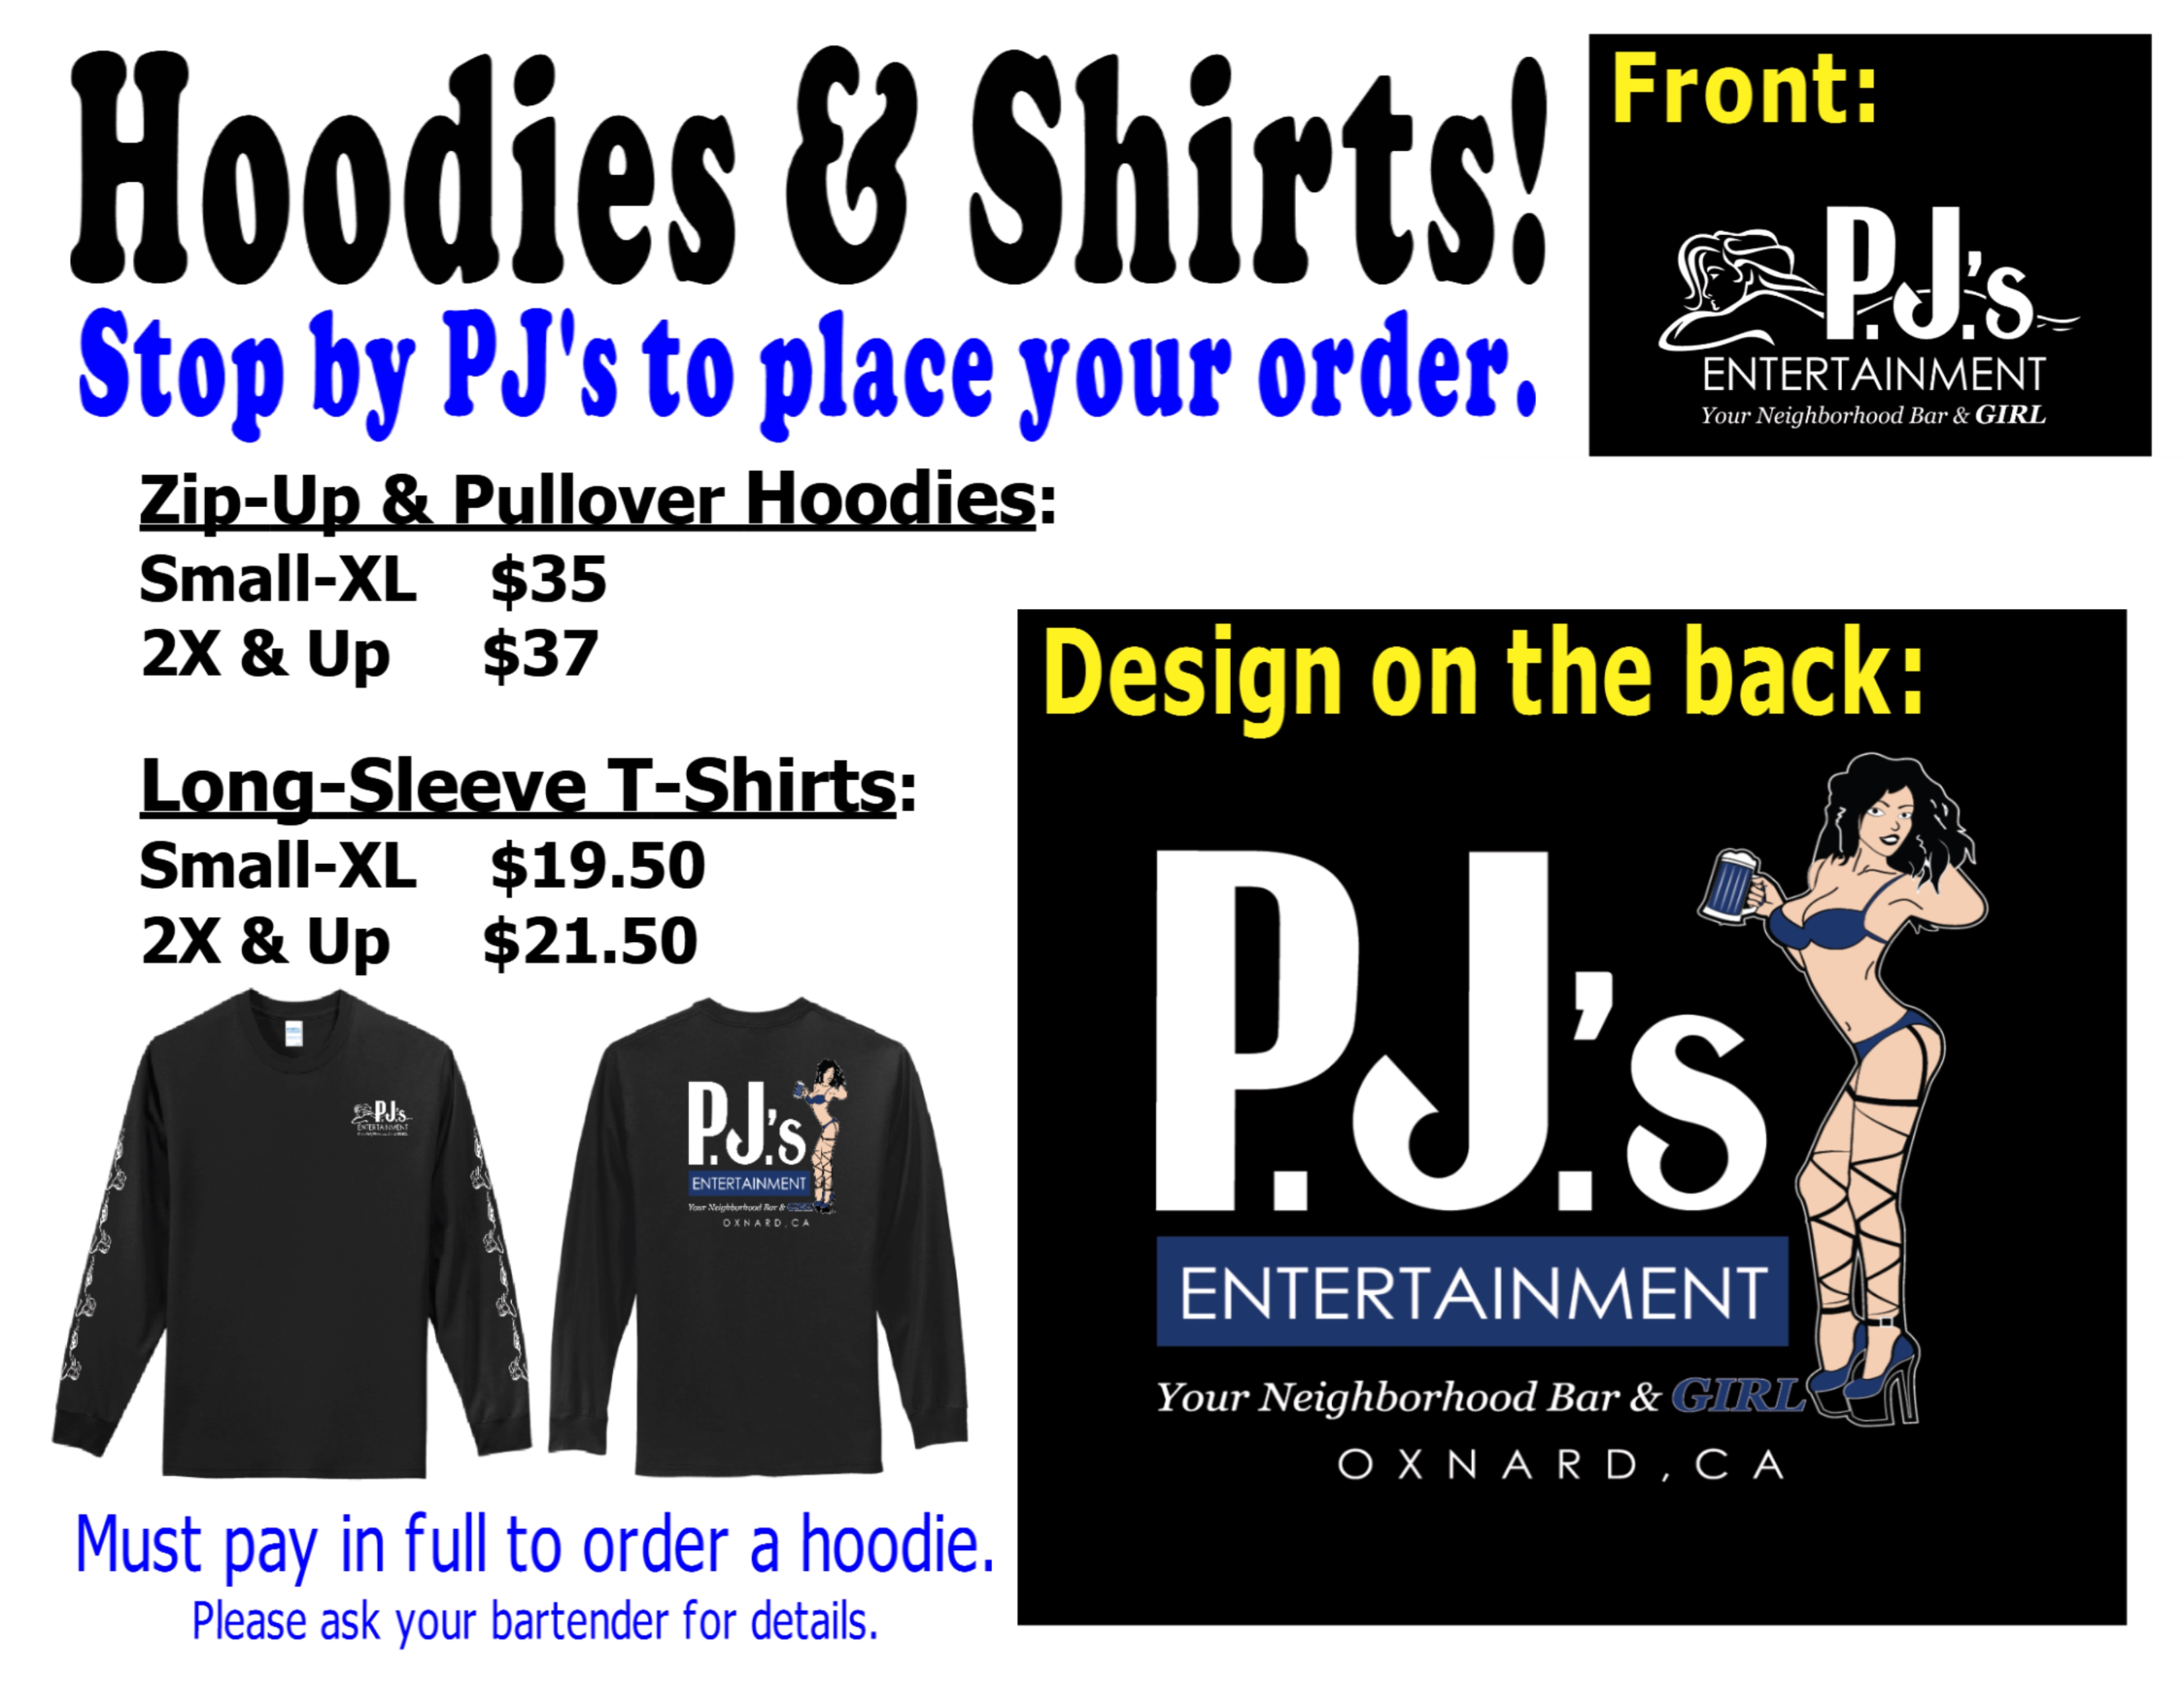 Ask your bartender how to order your hoodie!